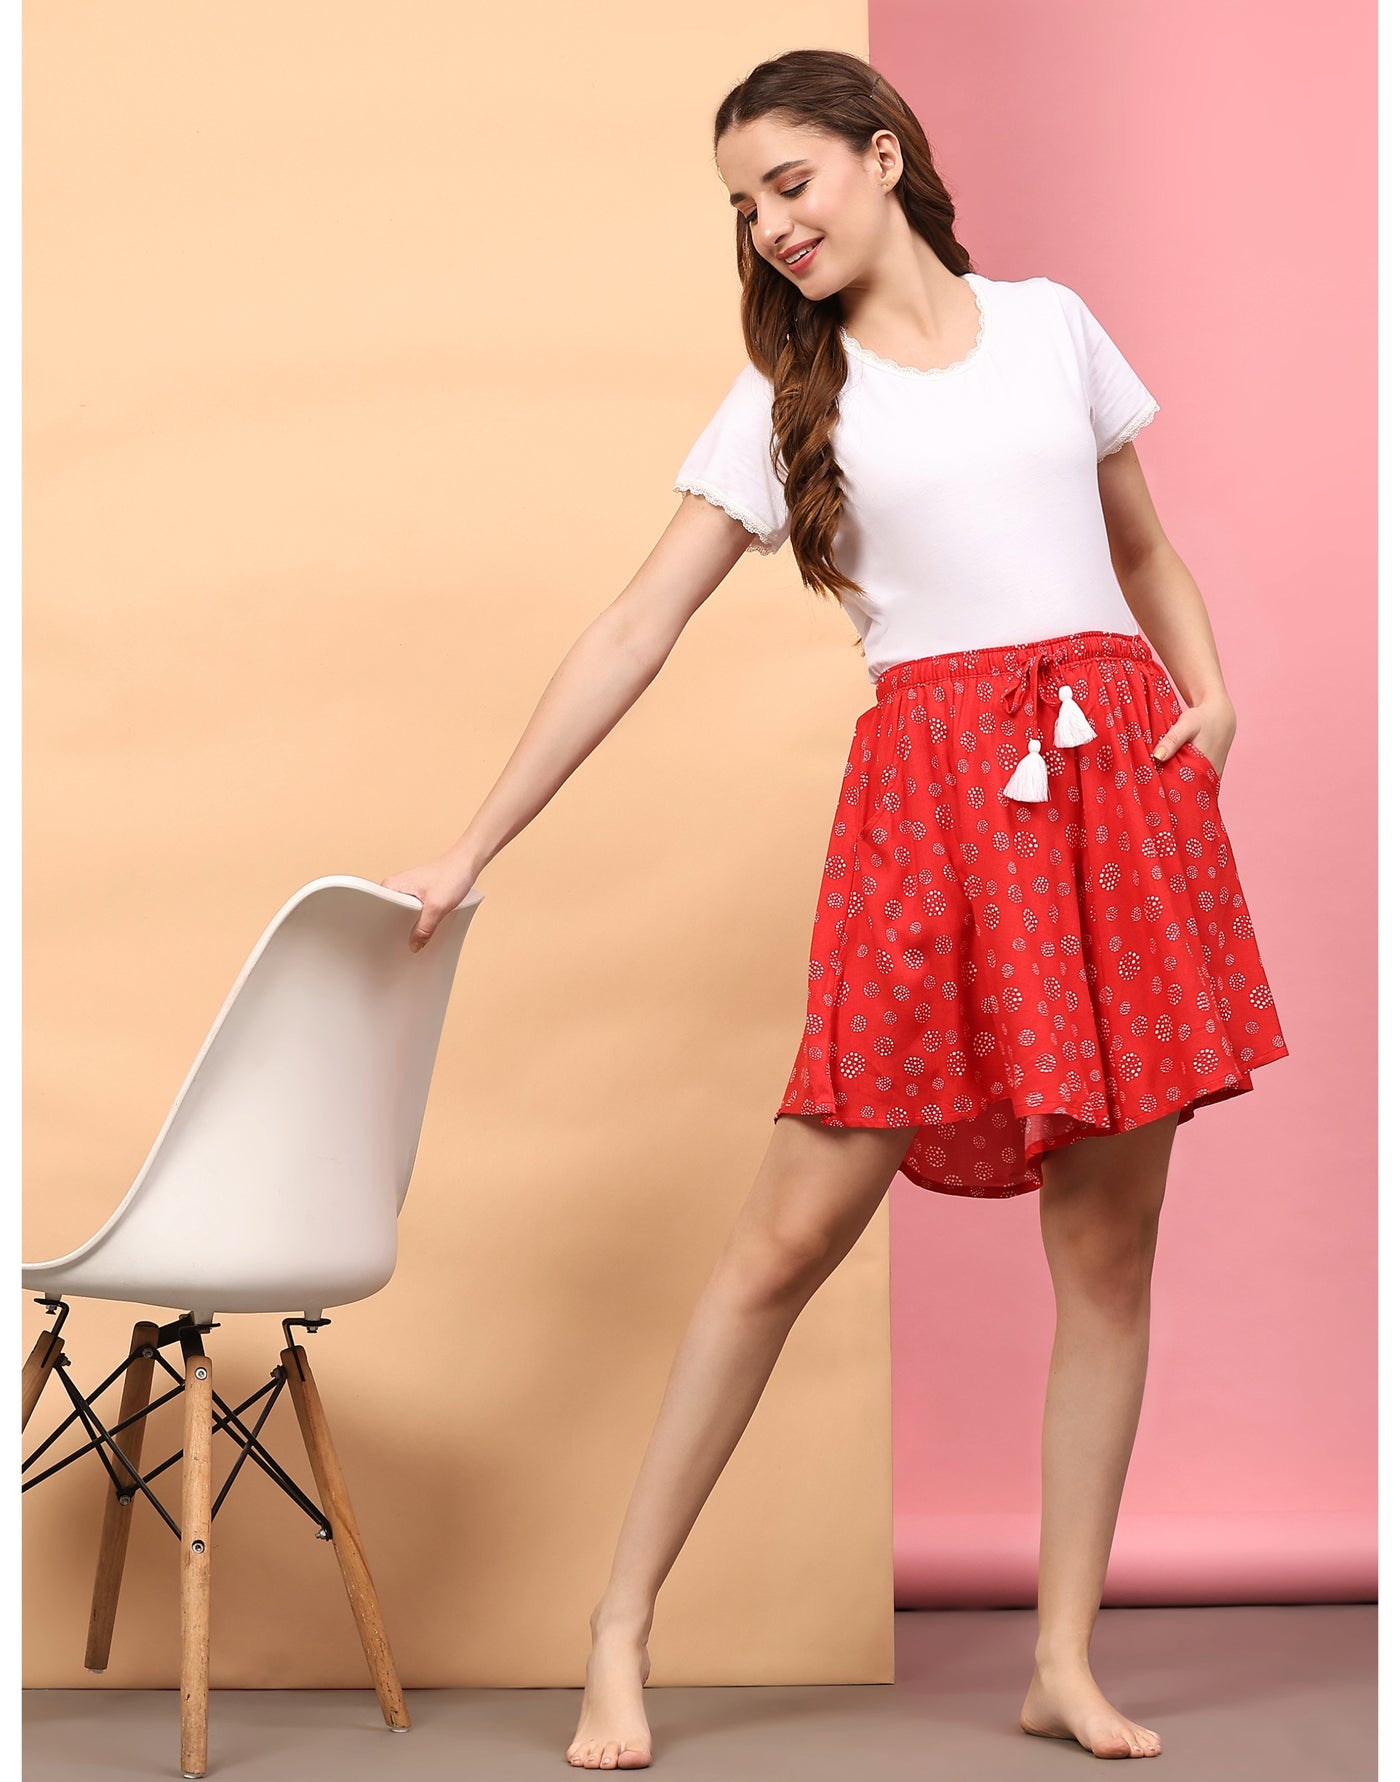 Culotte Shorts for Women-Red Dot